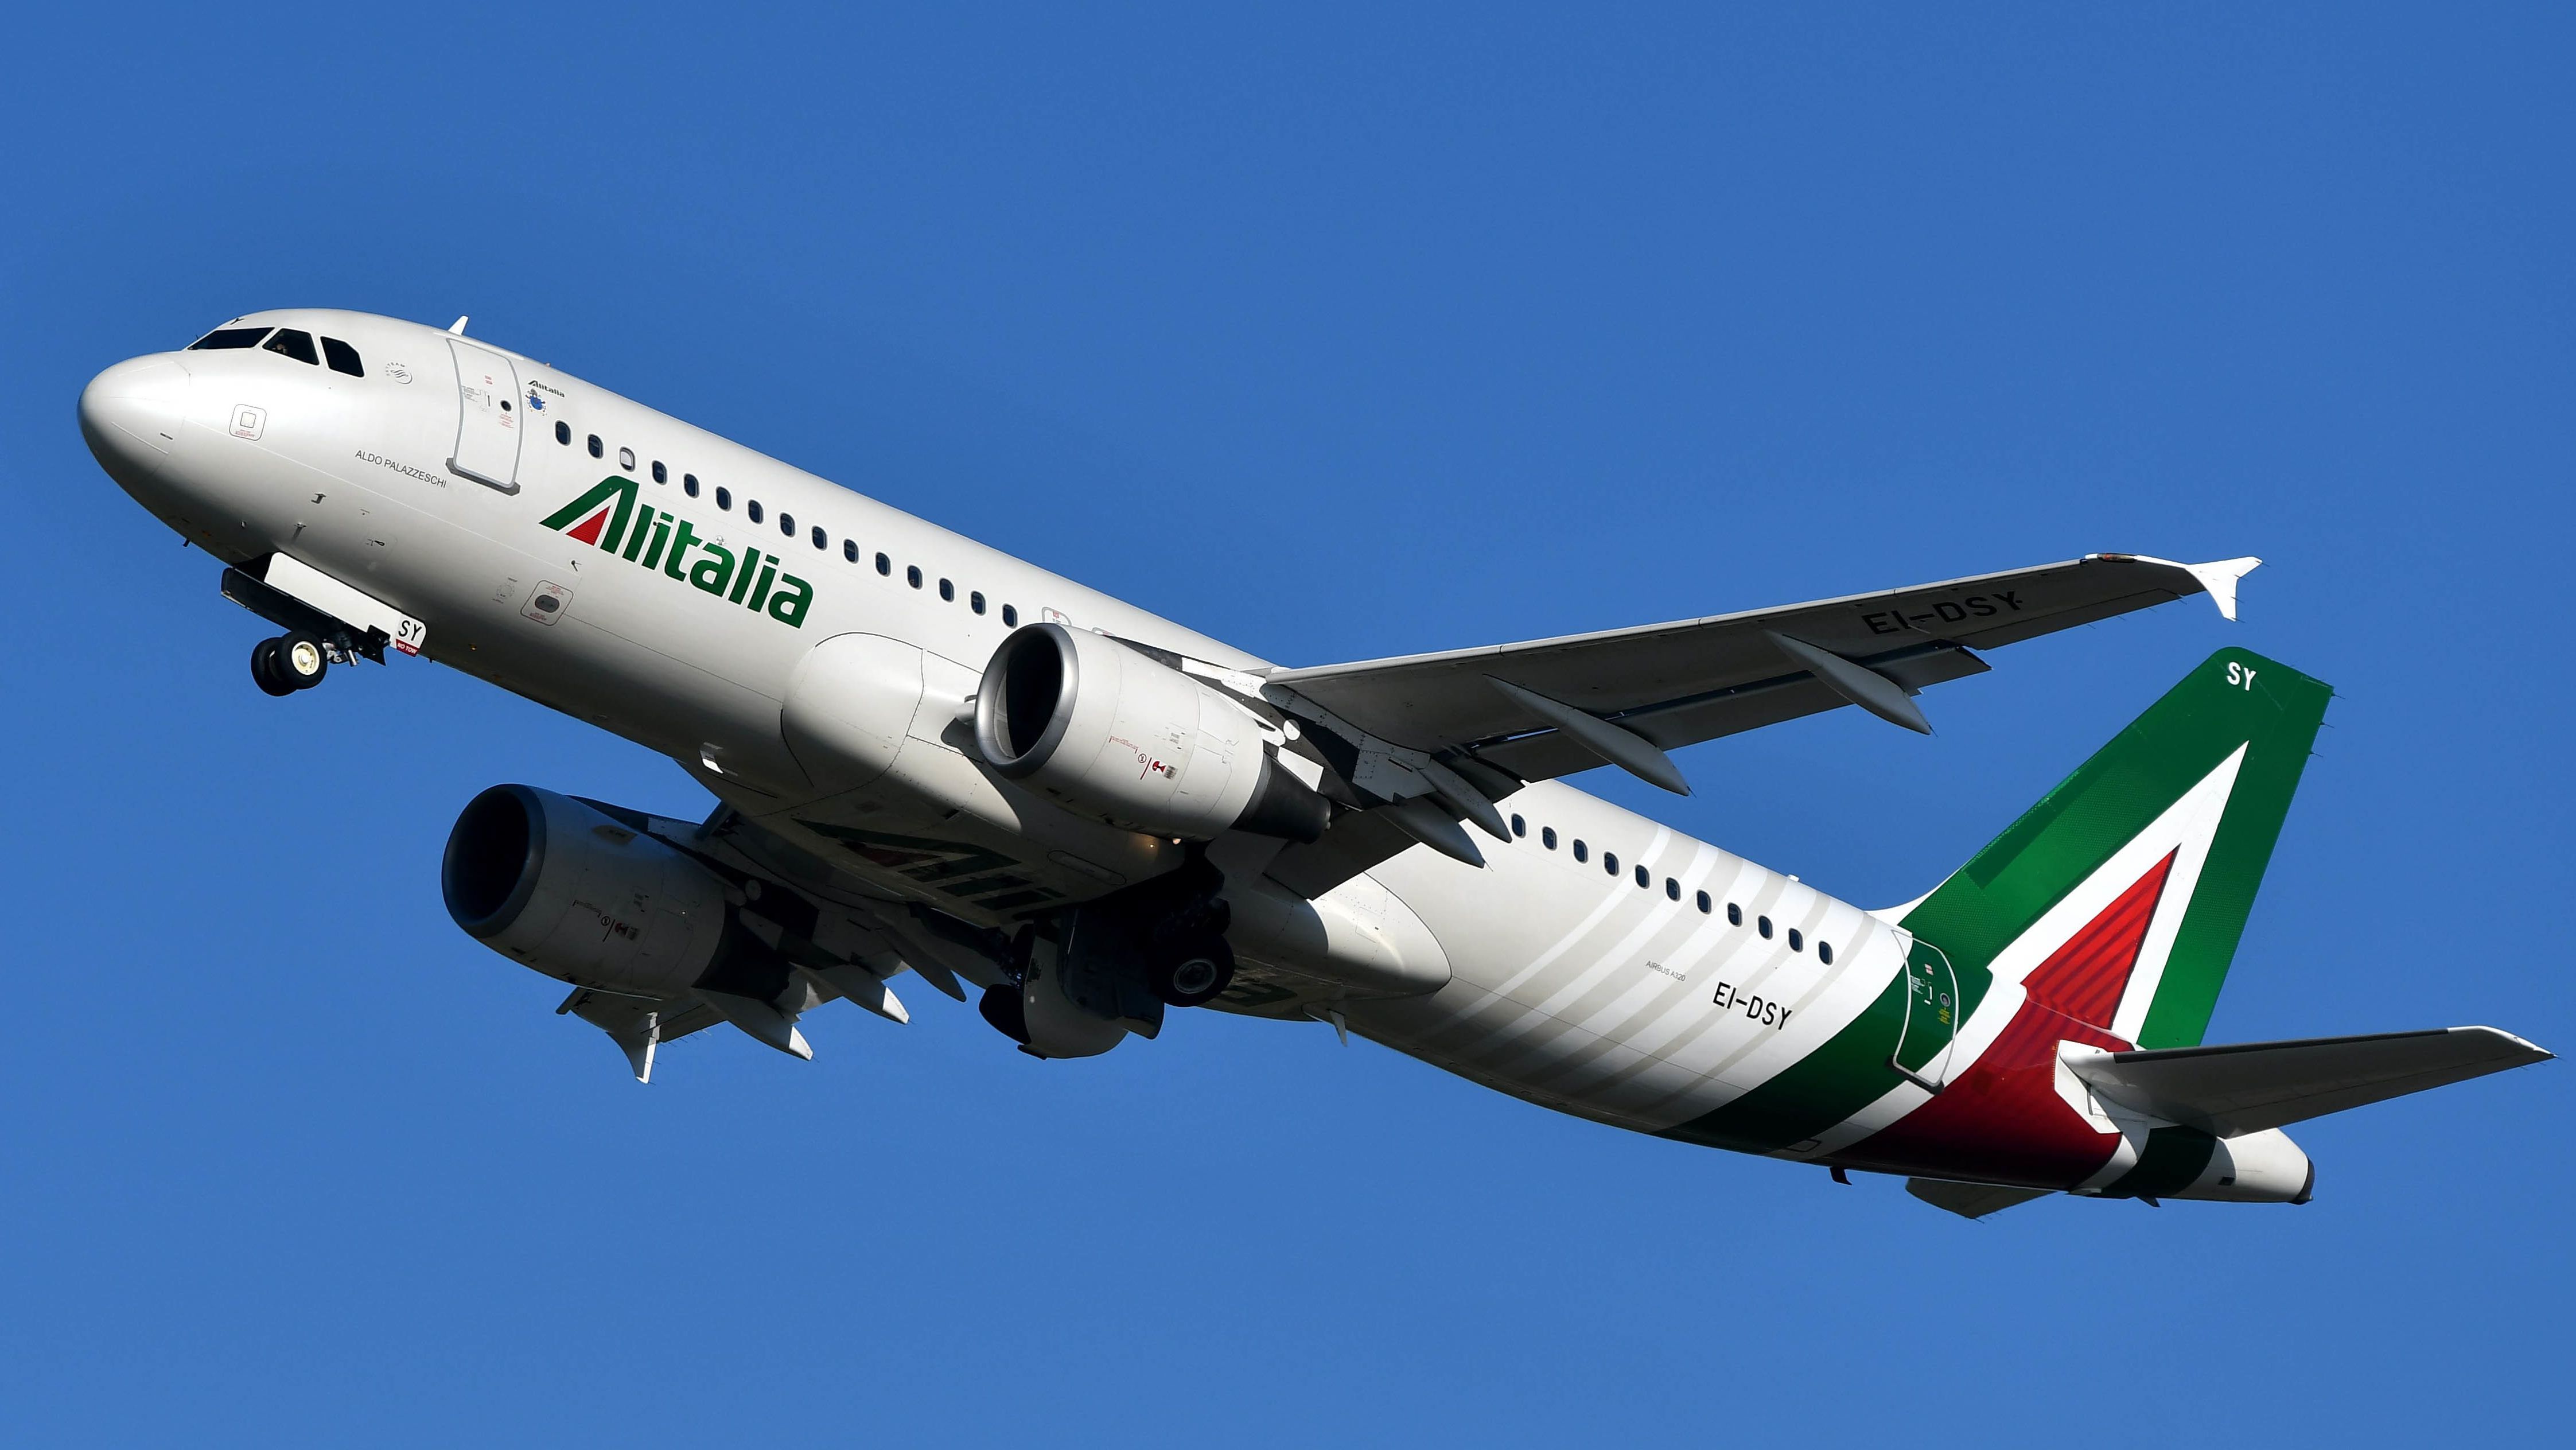 16 Facts About Alitalia - Facts.net